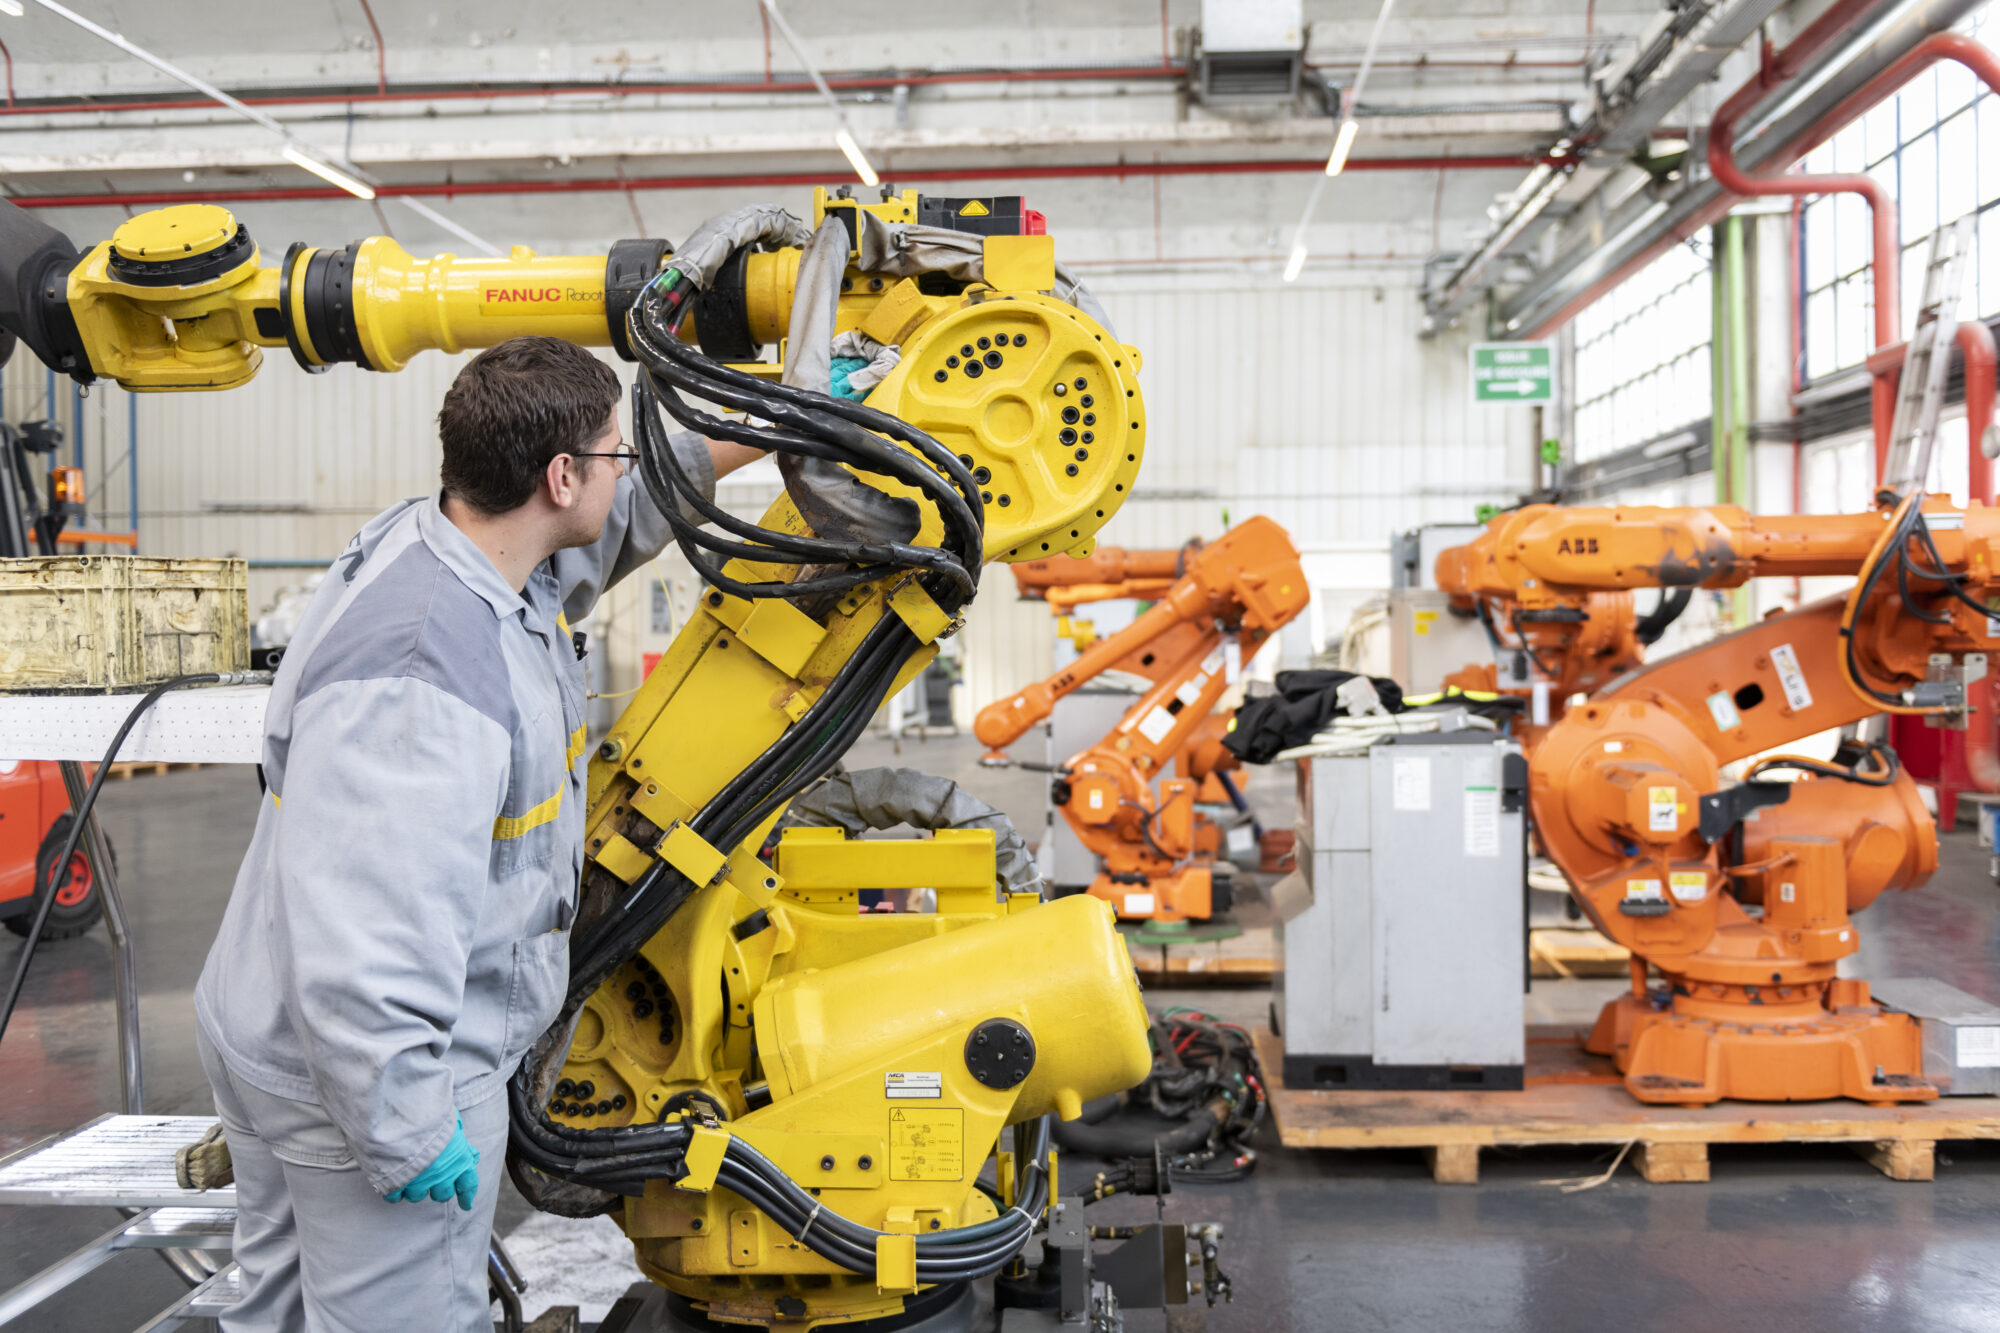 2022 - Story - Retrofitting robots: the other operation at the Refactory